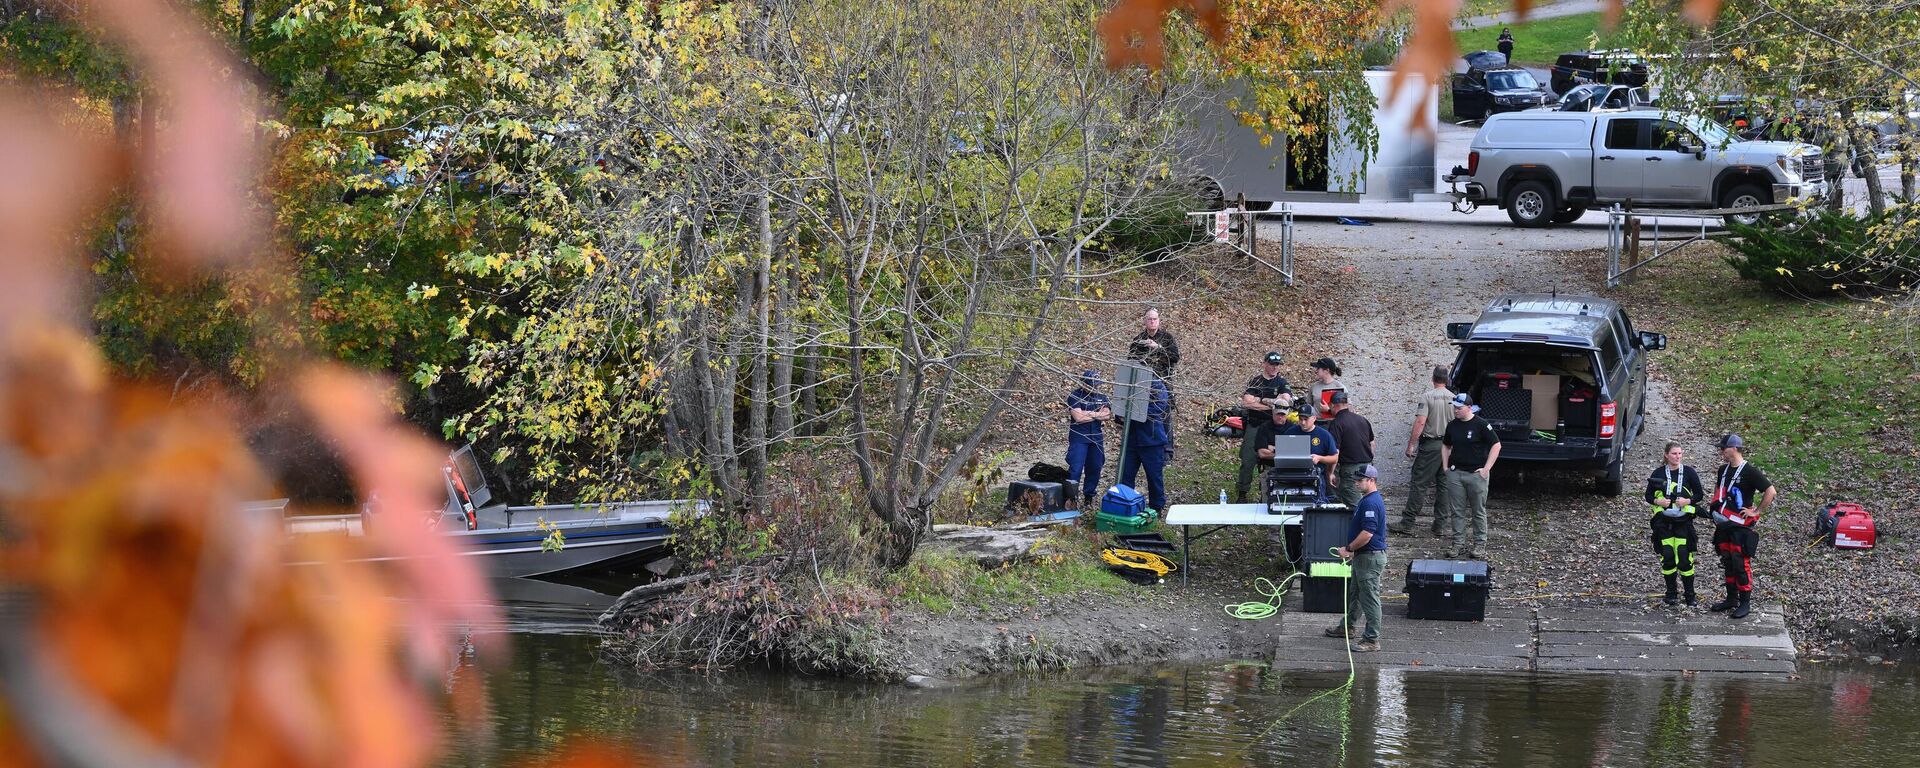 Law enforcement officials prepare to search the Androscoggin River in Lisbon Falls, Maine, on October 27, 2023, in the aftermath of a mass shooting in Lewiston, Maine. Police in Maine struggled for a second day on October 27, 2023, to catch a man who gunned down 18 people with a semi-automatic rifle in a bowling alley and a bar in a town where locals were enjoying an evening out. Robert Card, 40, is accused of being the man seen on security cameras walking into a Lewiston bowling alley on the evening of October 25, 2023, and launching the country's deadliest mass shooting of the year so far. In addition to the 18 murdered at the bowling venue and later in a bar, the US Army reservist is accused of wounding 13. - Sputnik International, 1920, 28.10.2023